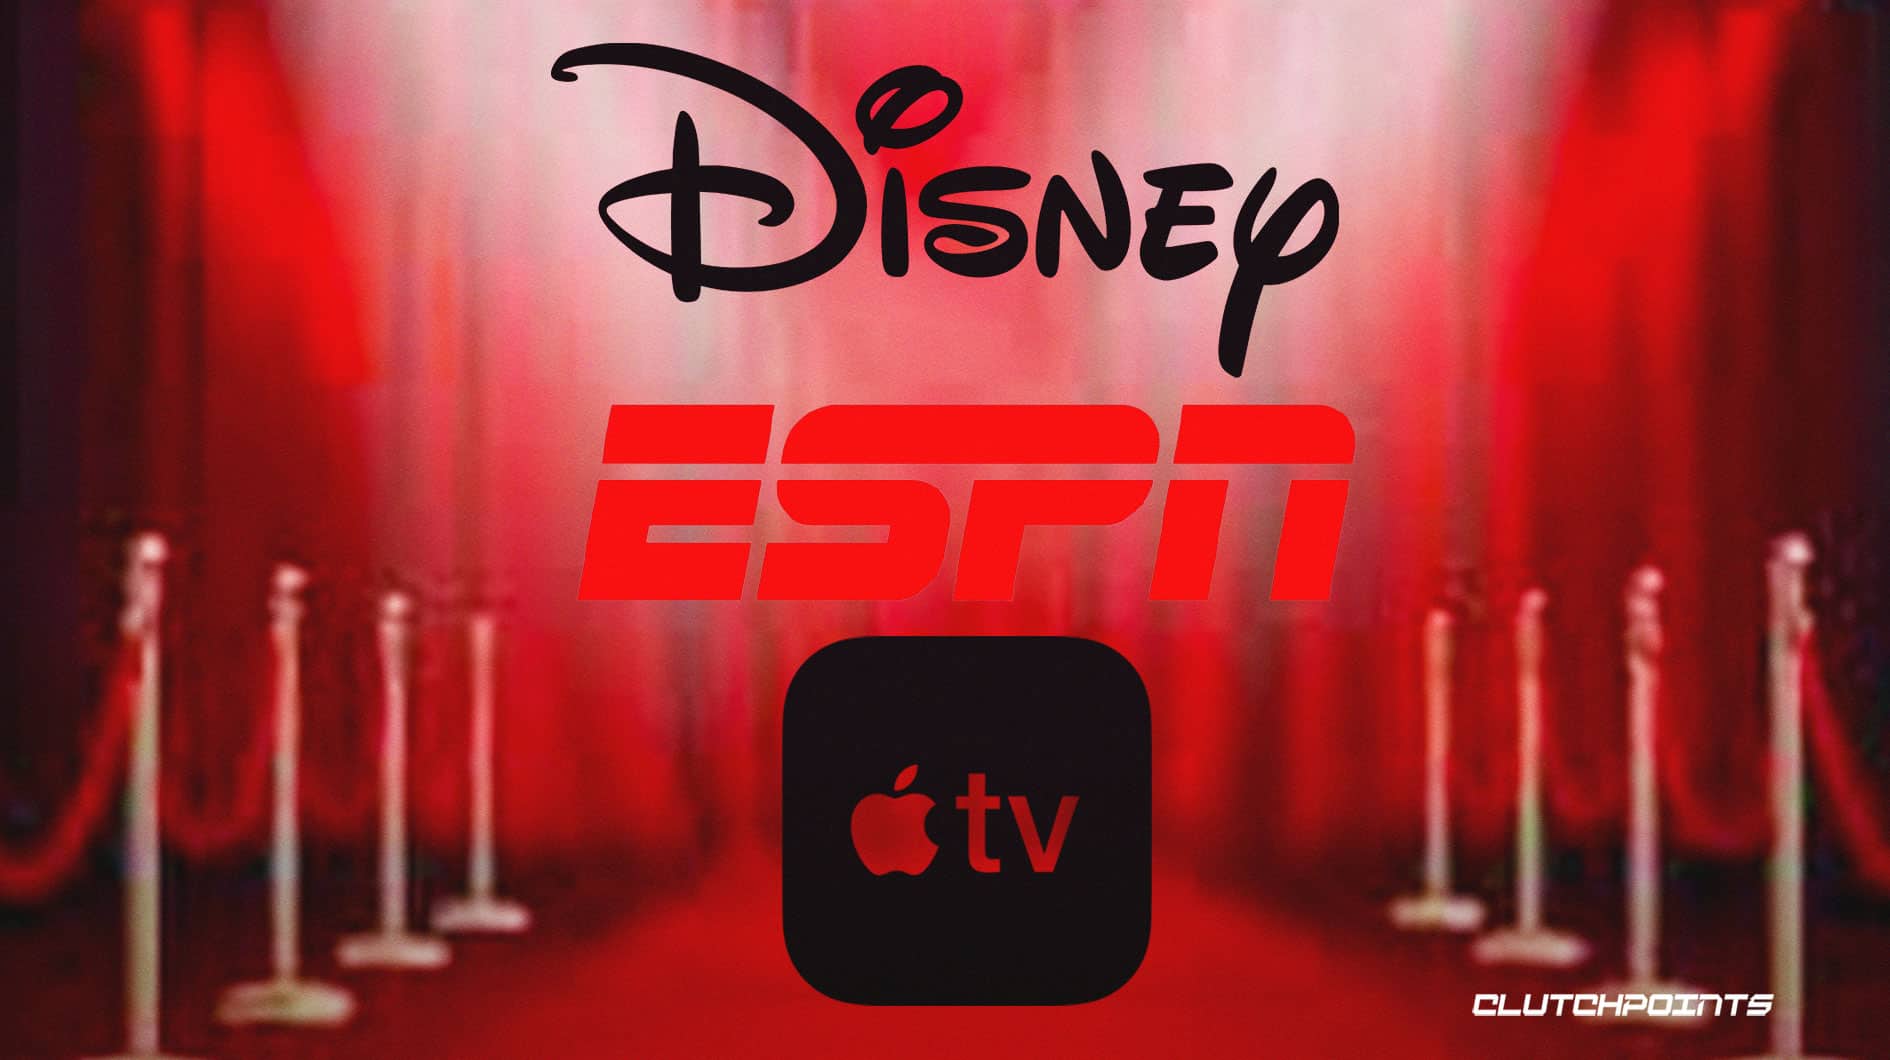 Experts suggest Apple TV will eventually buy ESPN